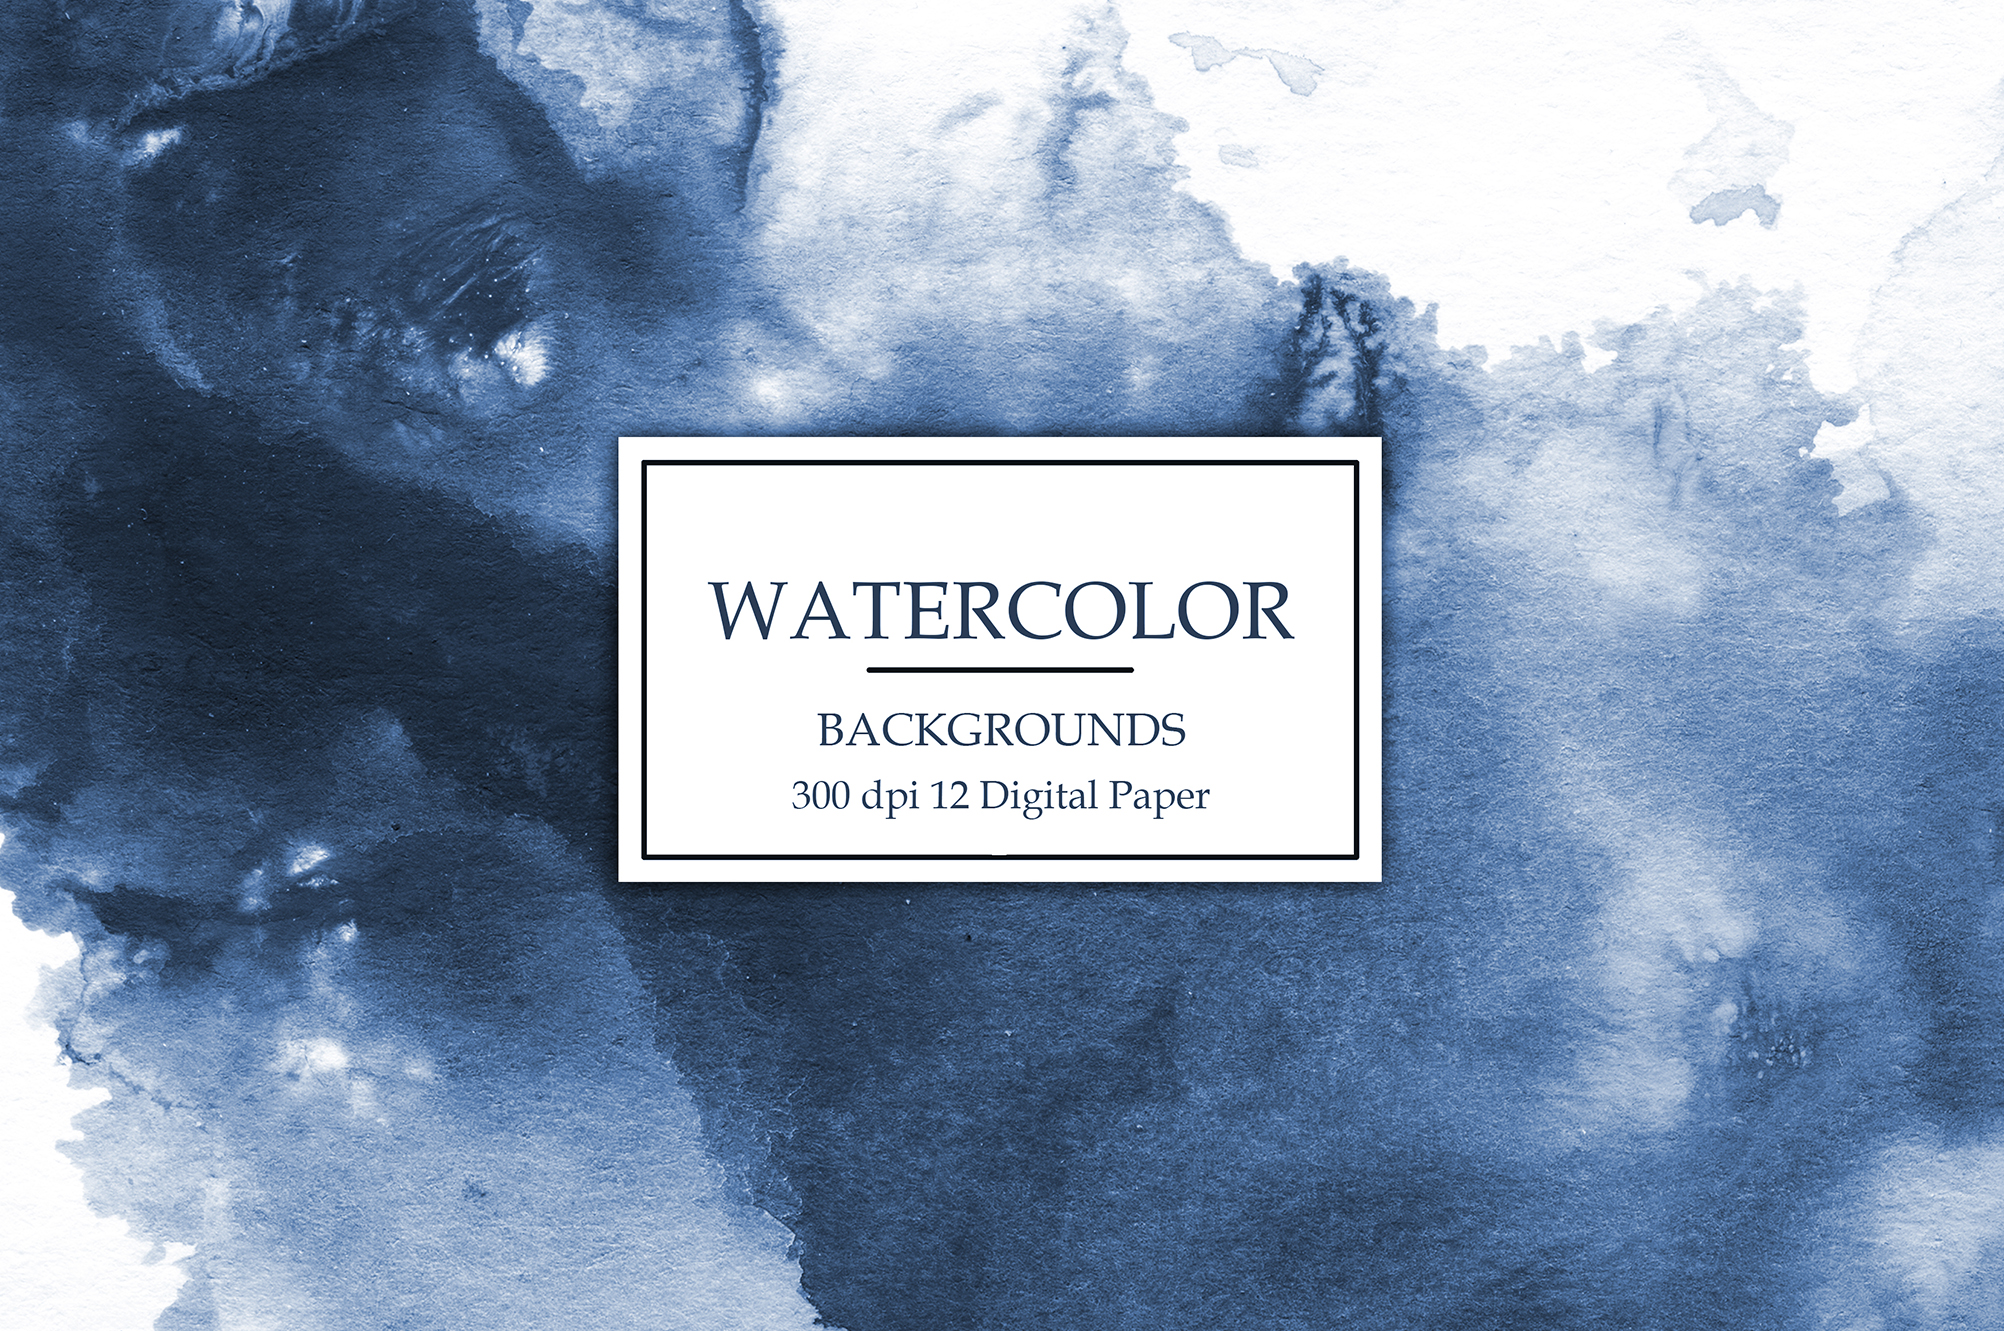 Watercolor Background Vsual